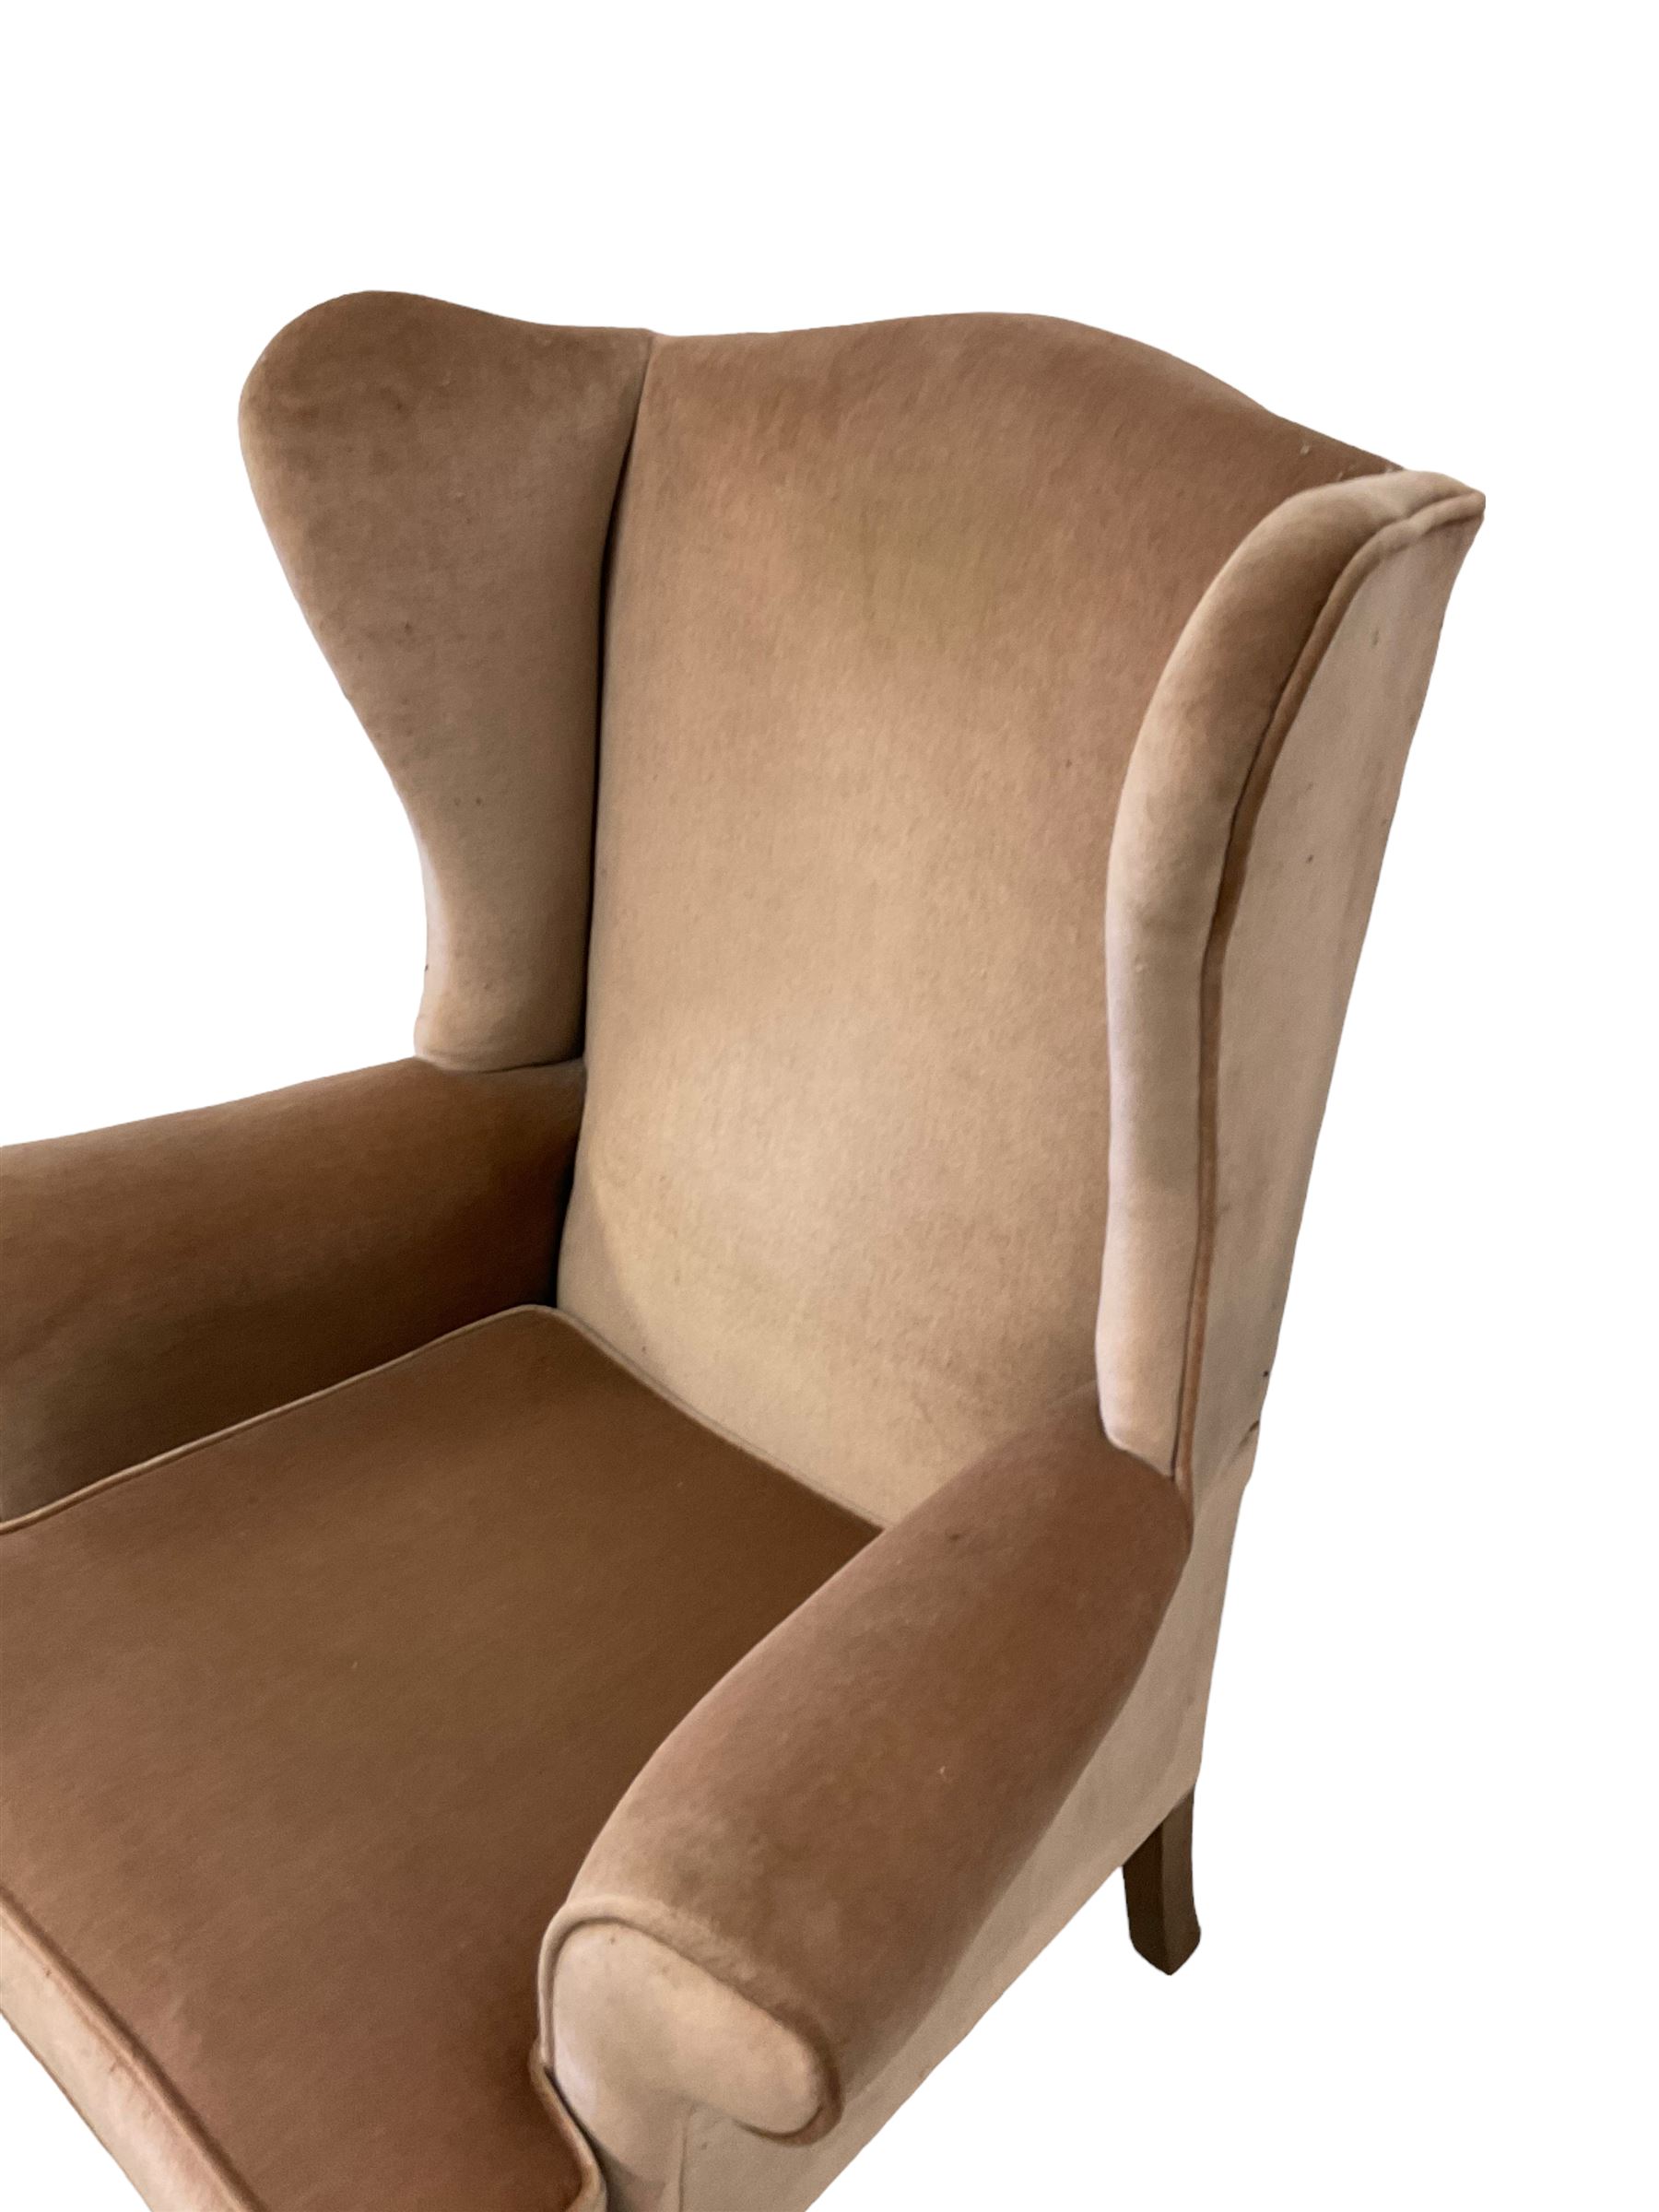 Parker Knoll - wingback armchair upholstered in light pink fabric - Image 3 of 4